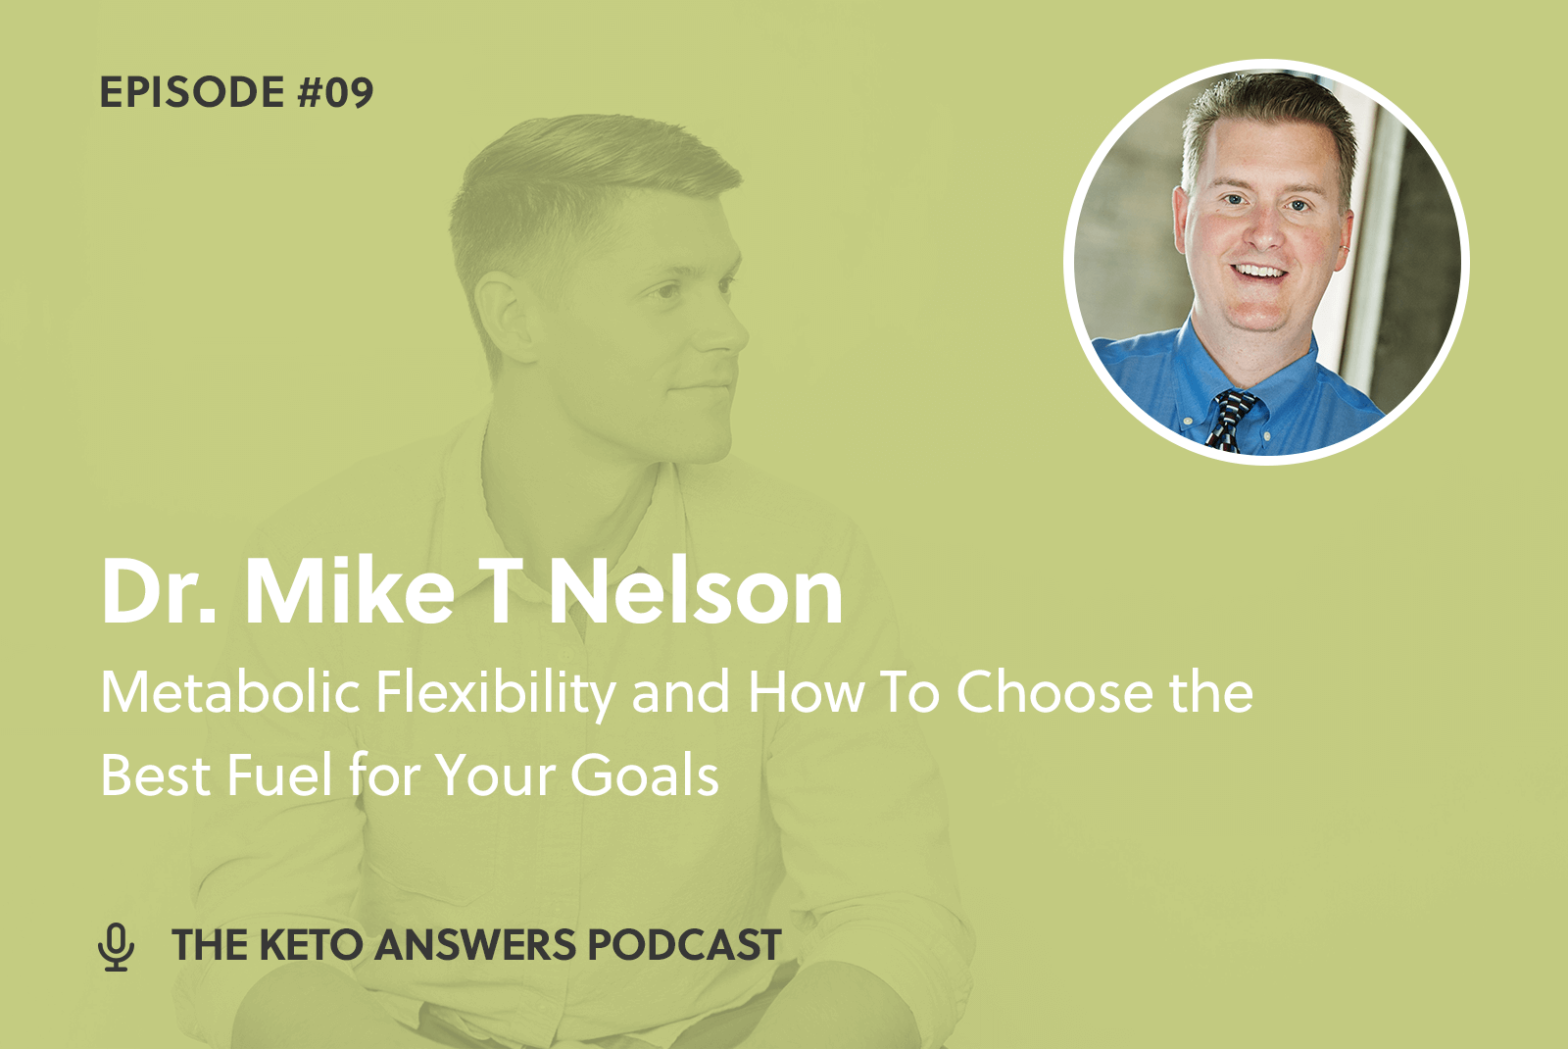 009: Metabolic Flexibility and How To Choose the Best Fuel for Your Goals - Dr. Mike T Nelson